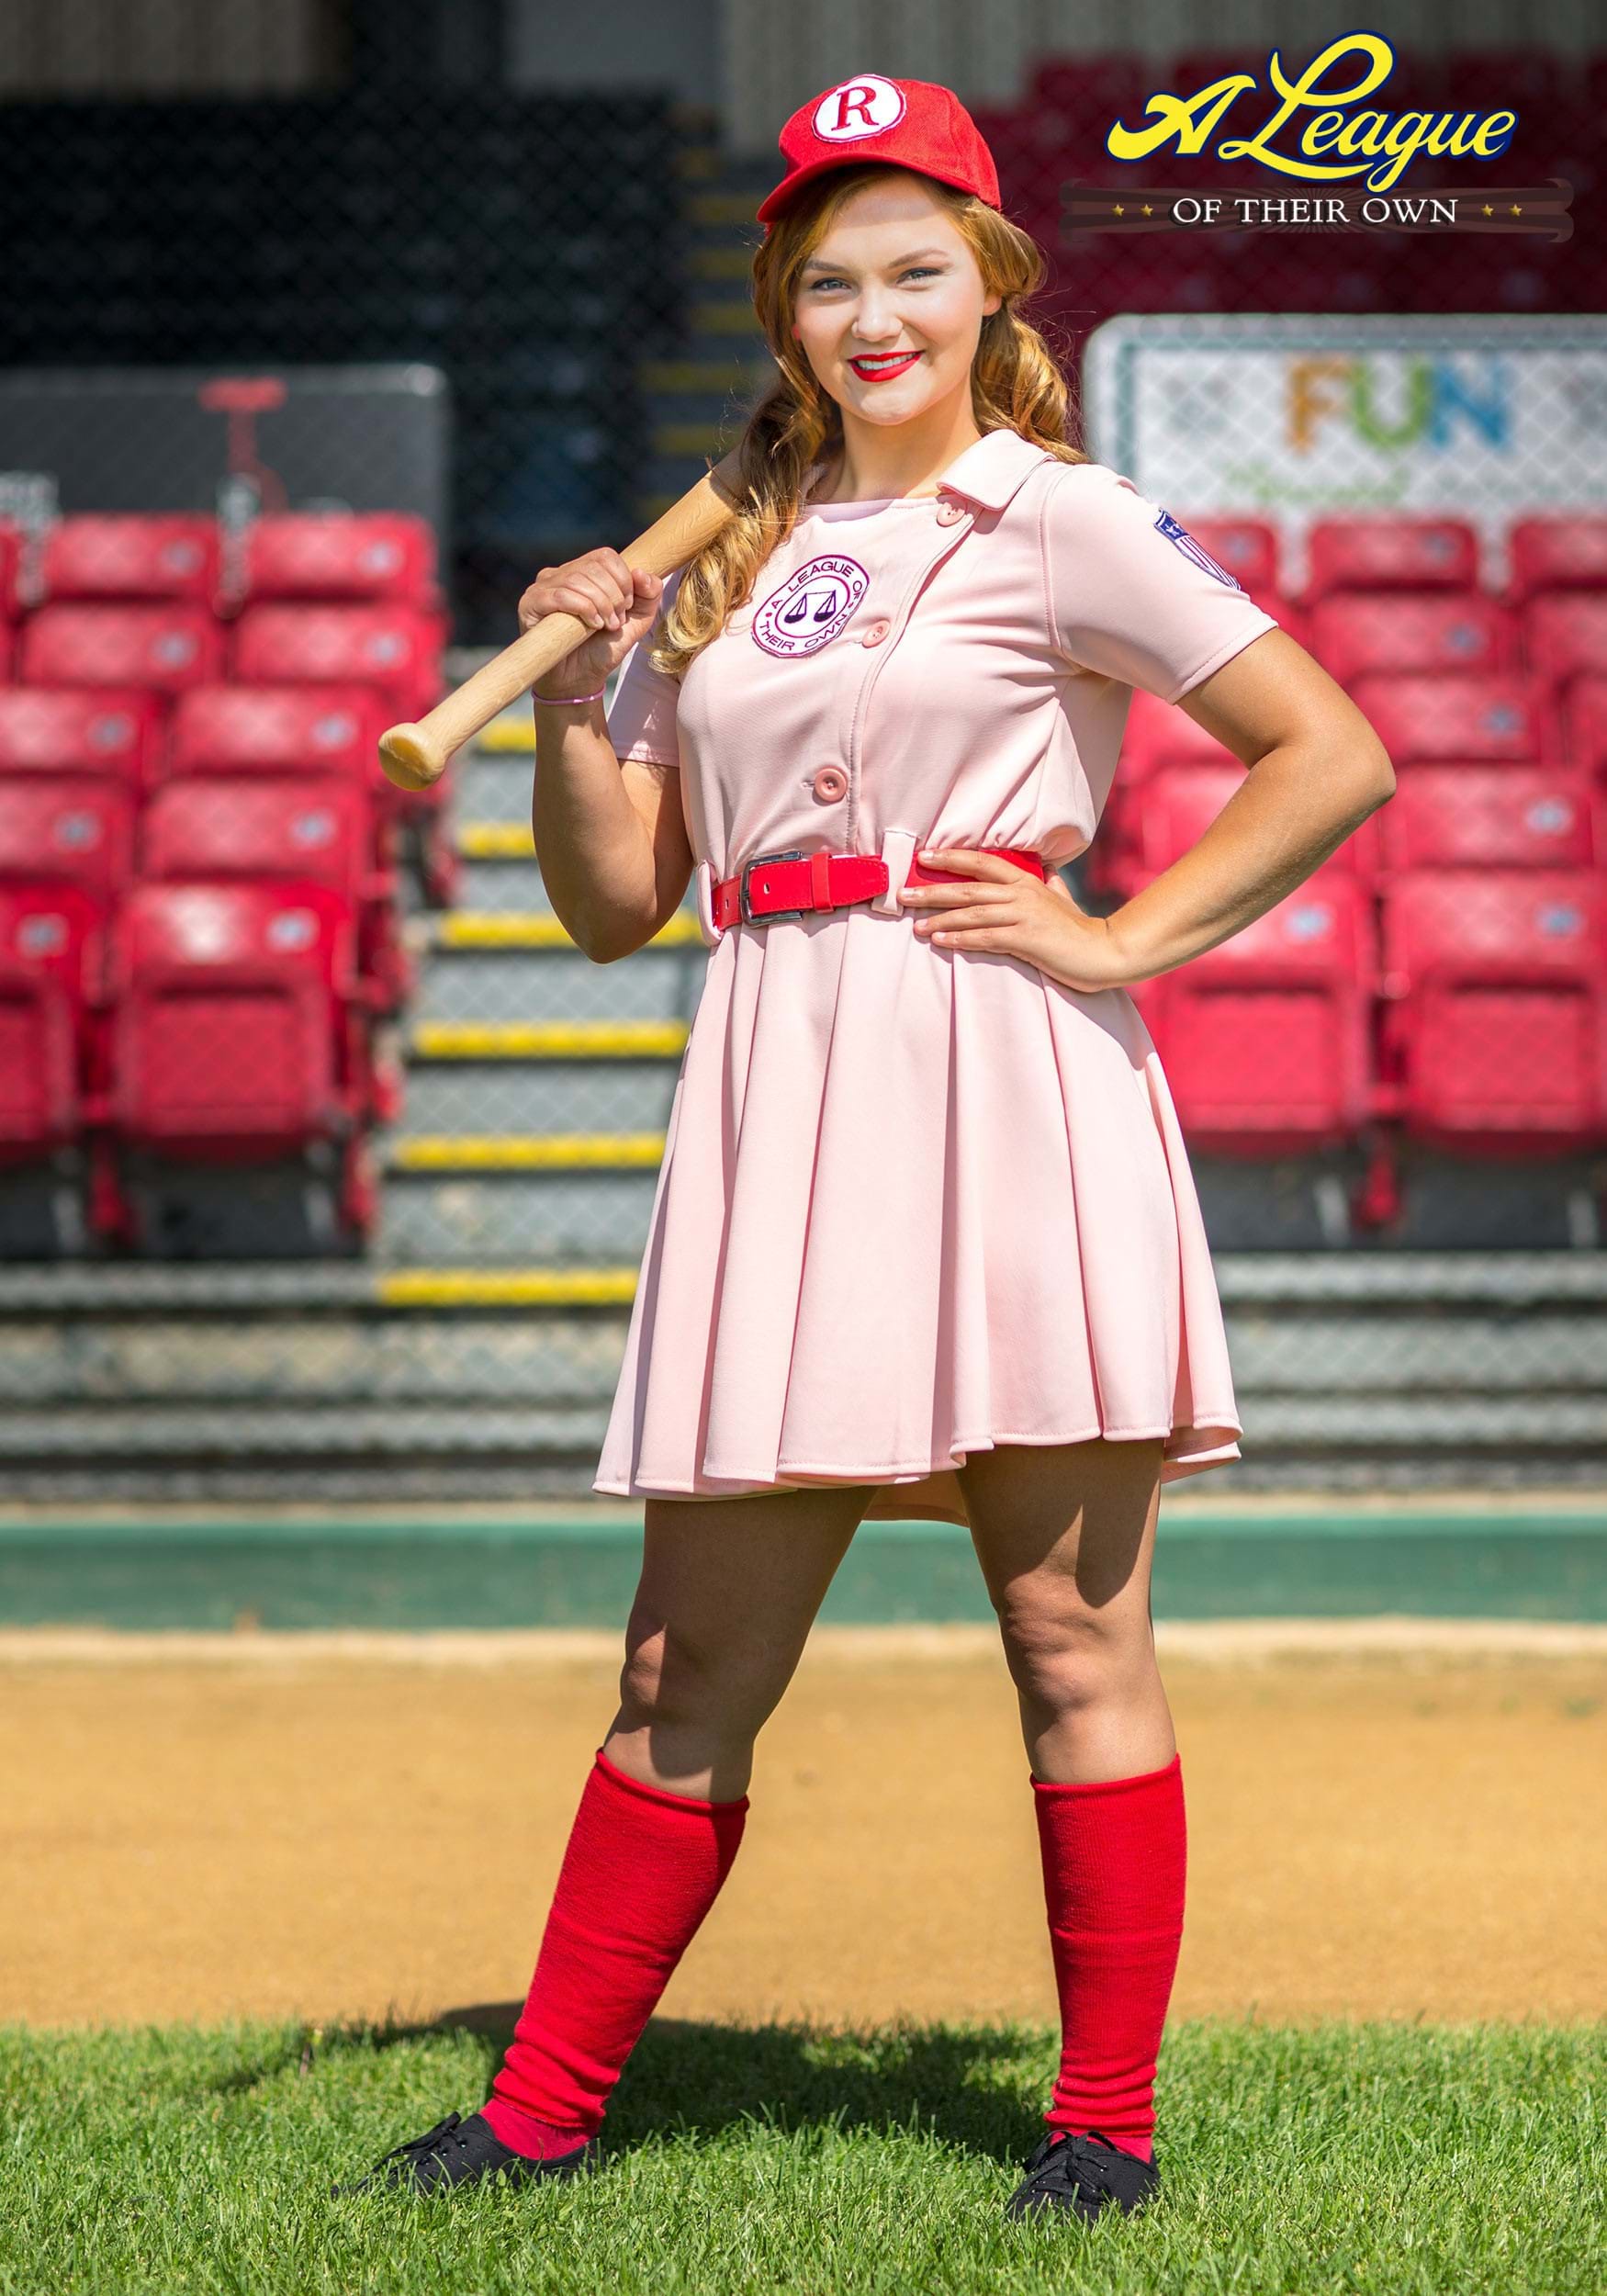 Women's Deluxe Dottie Costume From A League Of Their Own